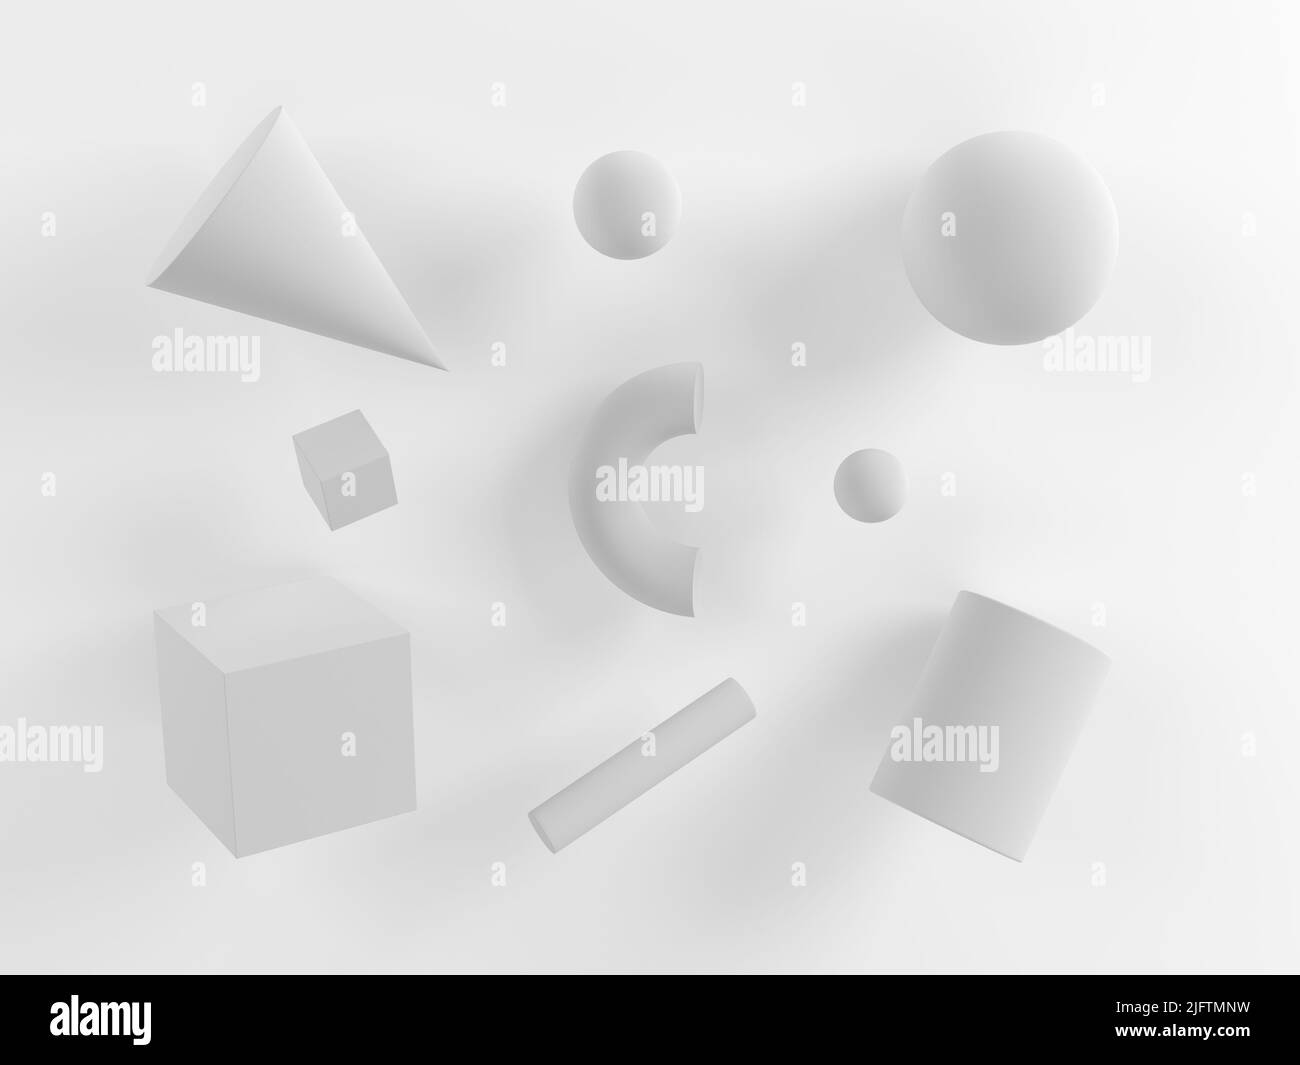 Abstract geometric shapes on gray background. 3d illustration. Monochrome. Stock Photo